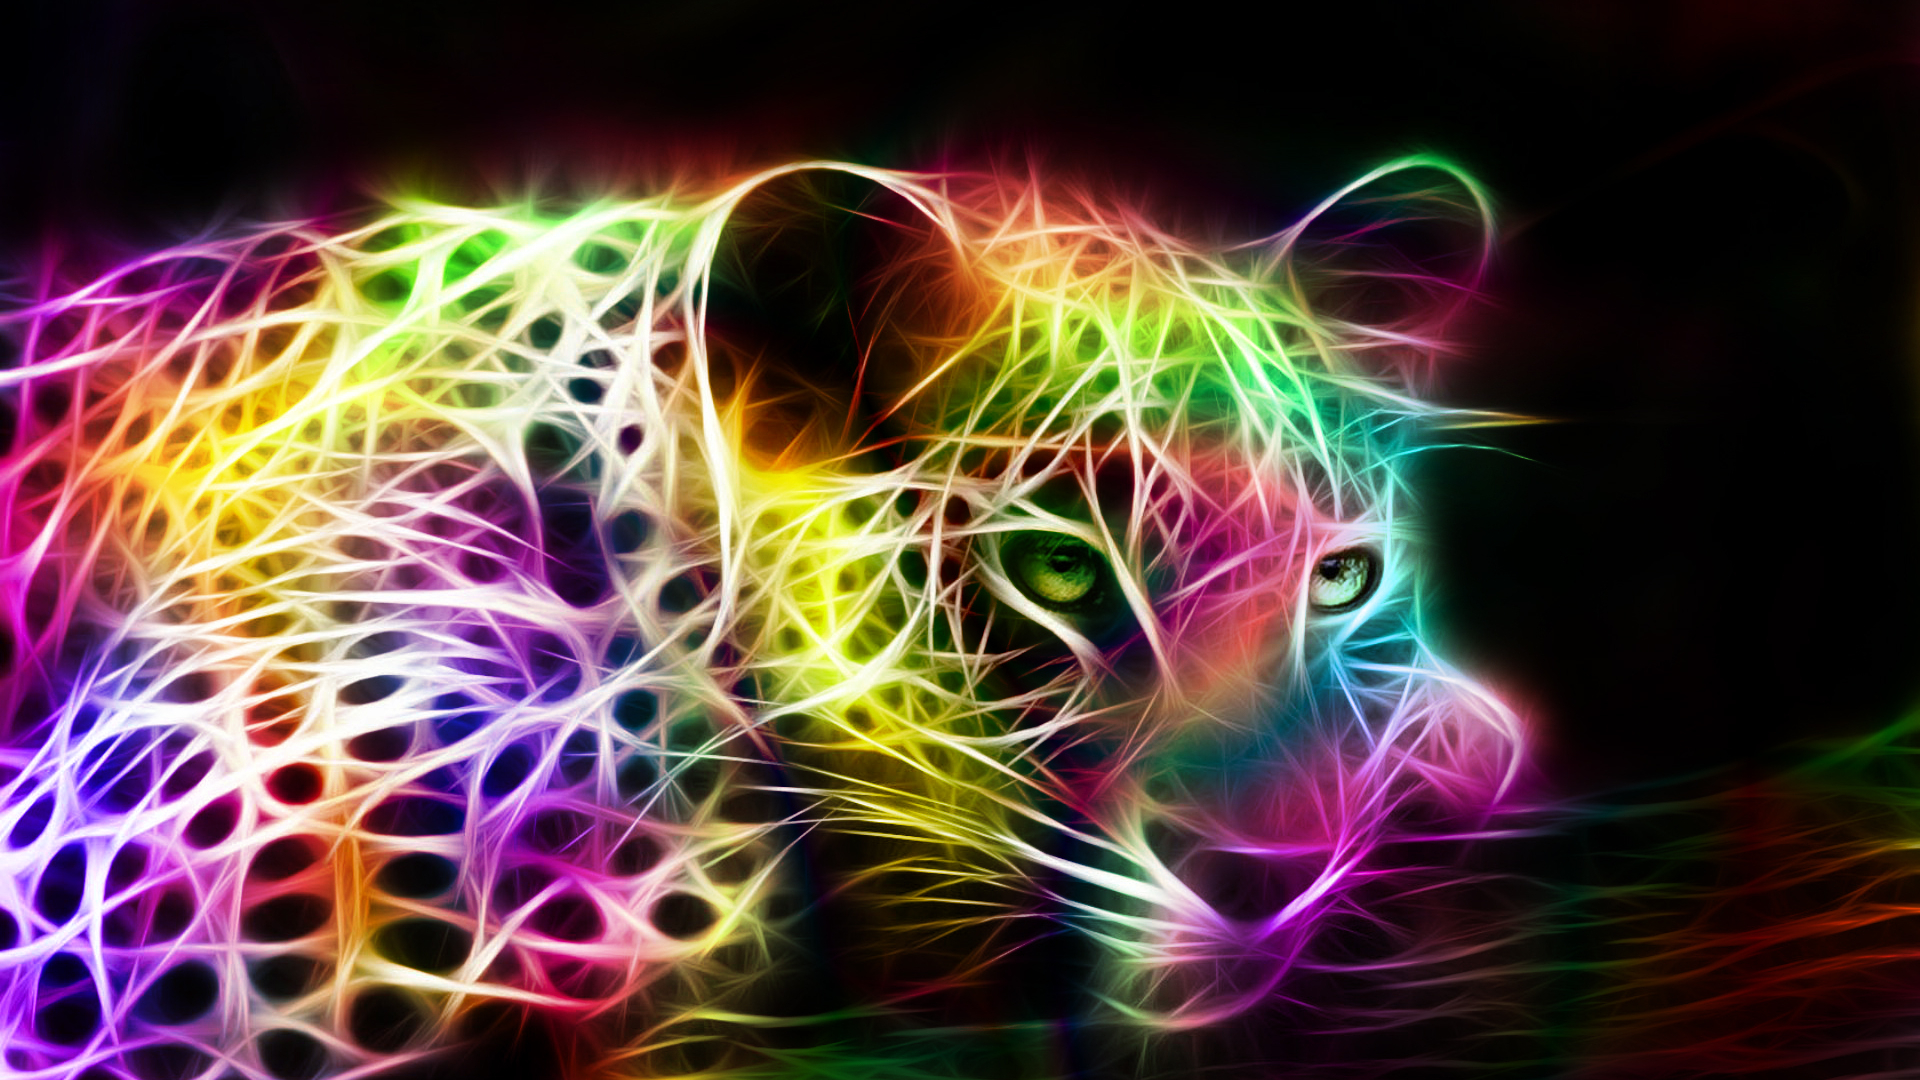 Free download 1920x1200px Colorful Cheetah Wallpaper [1920x1200] for your Desktop, Mobile & Tablet. Explore Colored Fire Wallpaper. Colored Fire Wallpaper, Colored Wallpaper, Colored Background